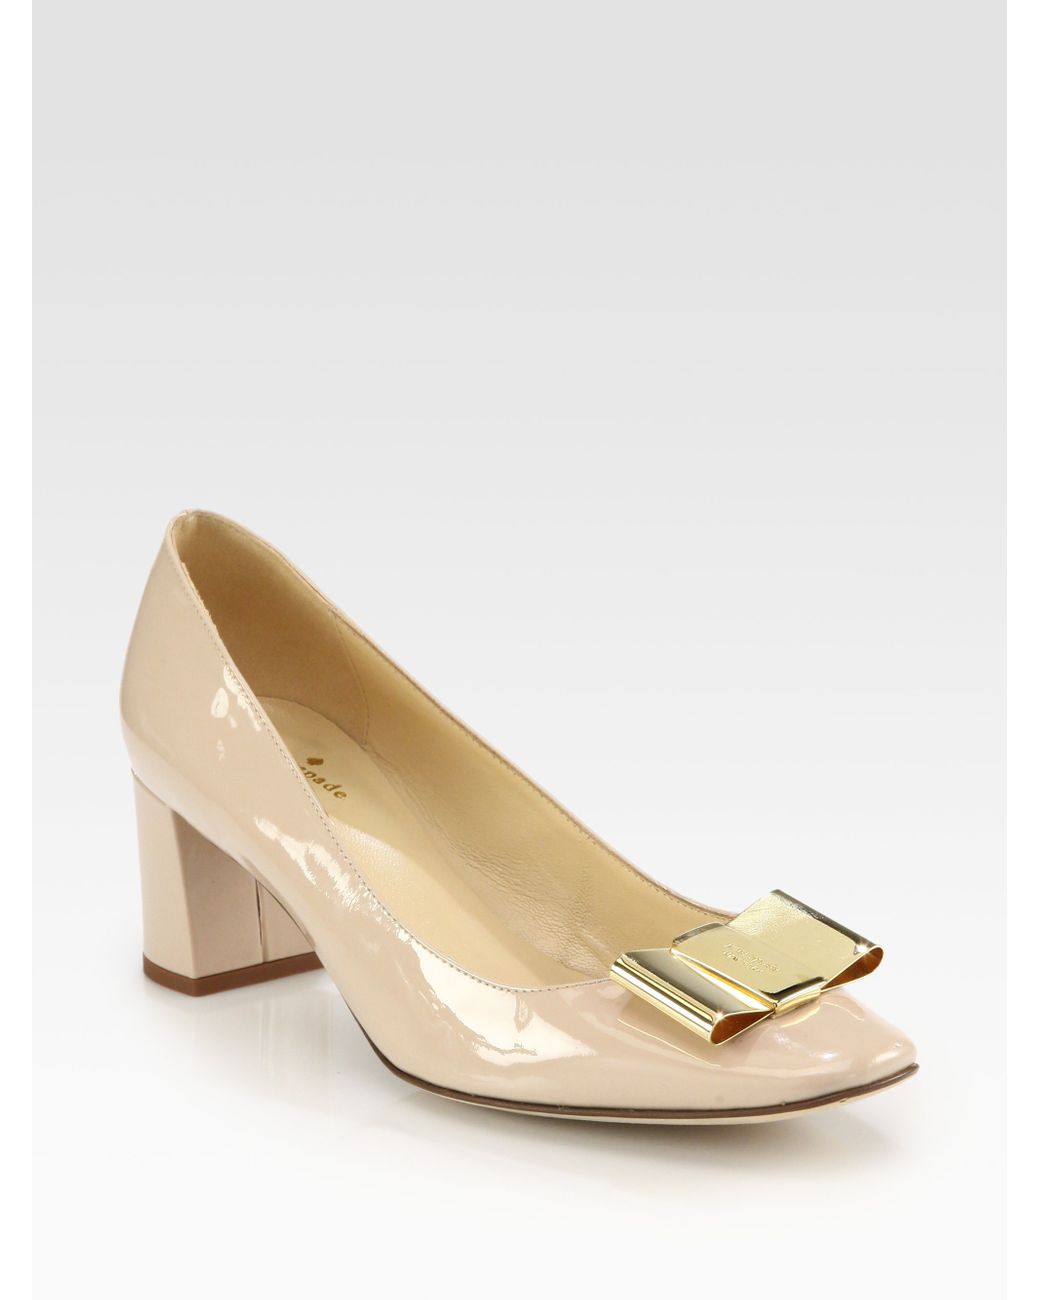 Kate Spade Dijon Patent Leather Bow Pumps in Pink | Lyst